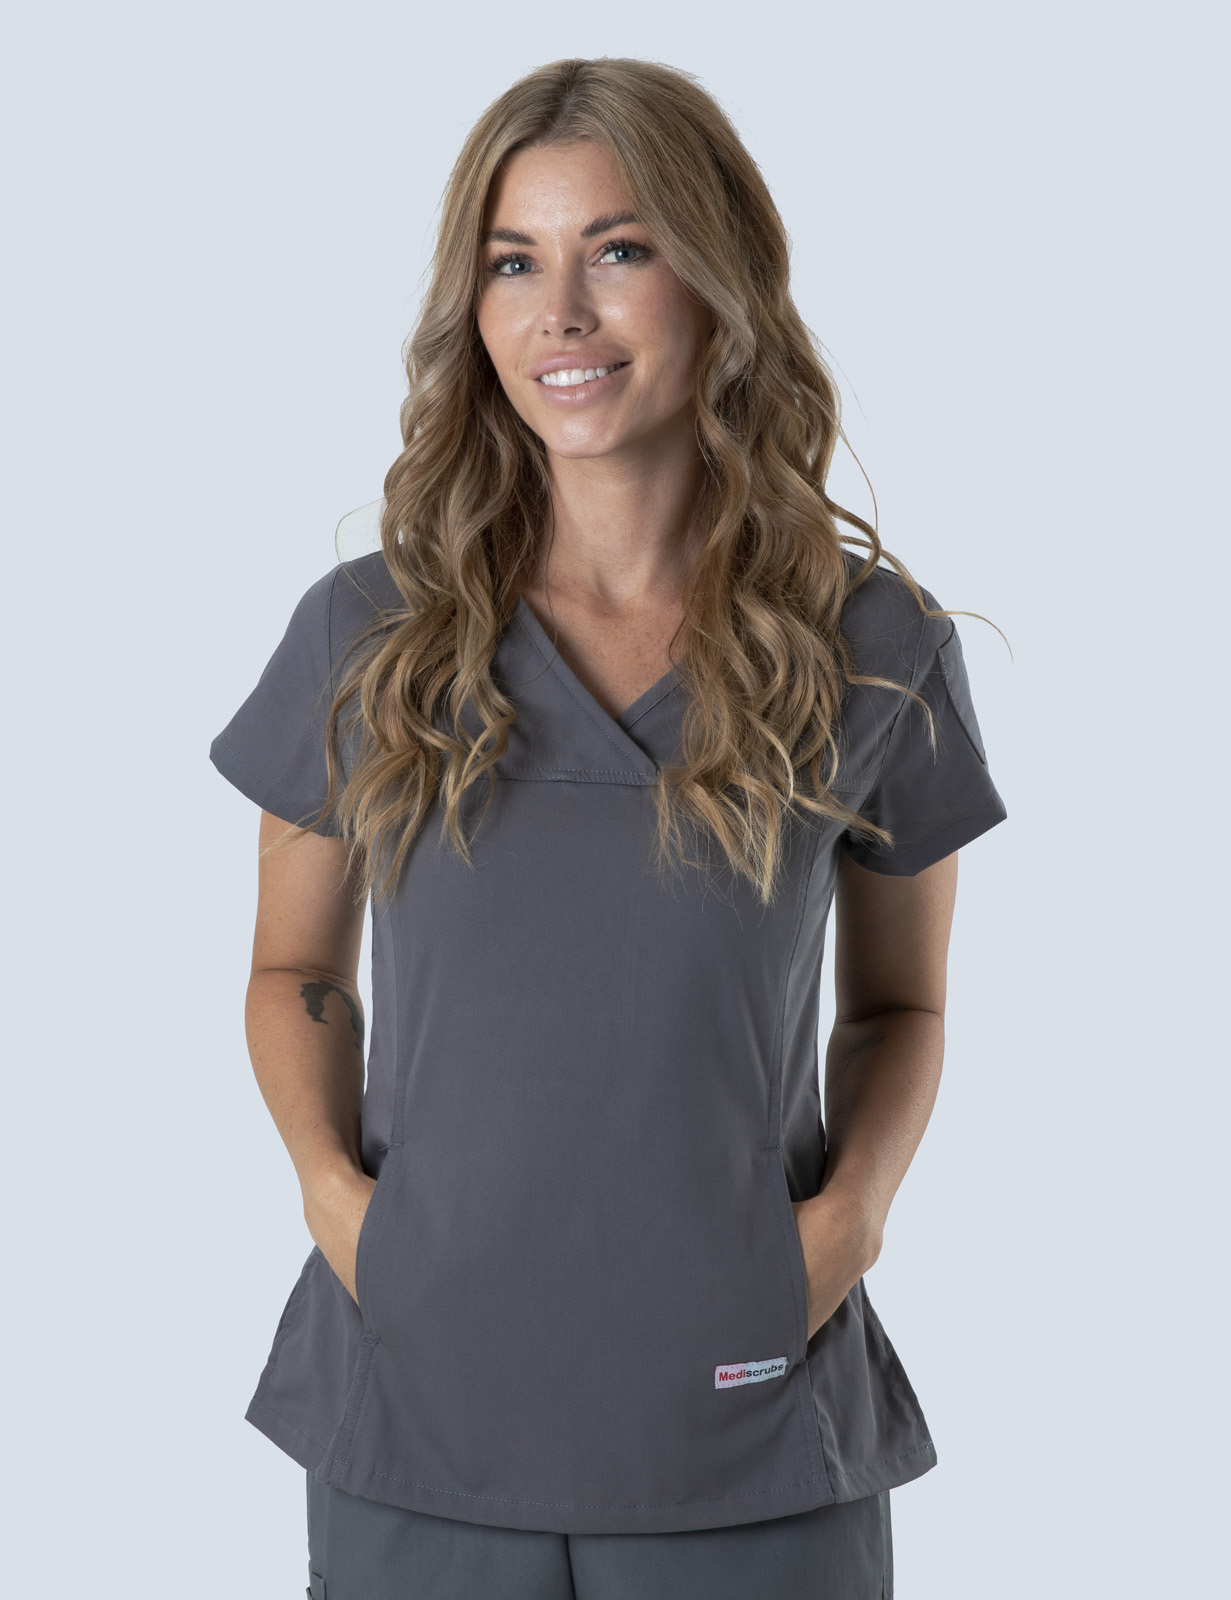 SCPU Hospital - RN Emergency (Women's Fit Solid Scrub Top and Cargo Pants in Steel Grey incl Logos)